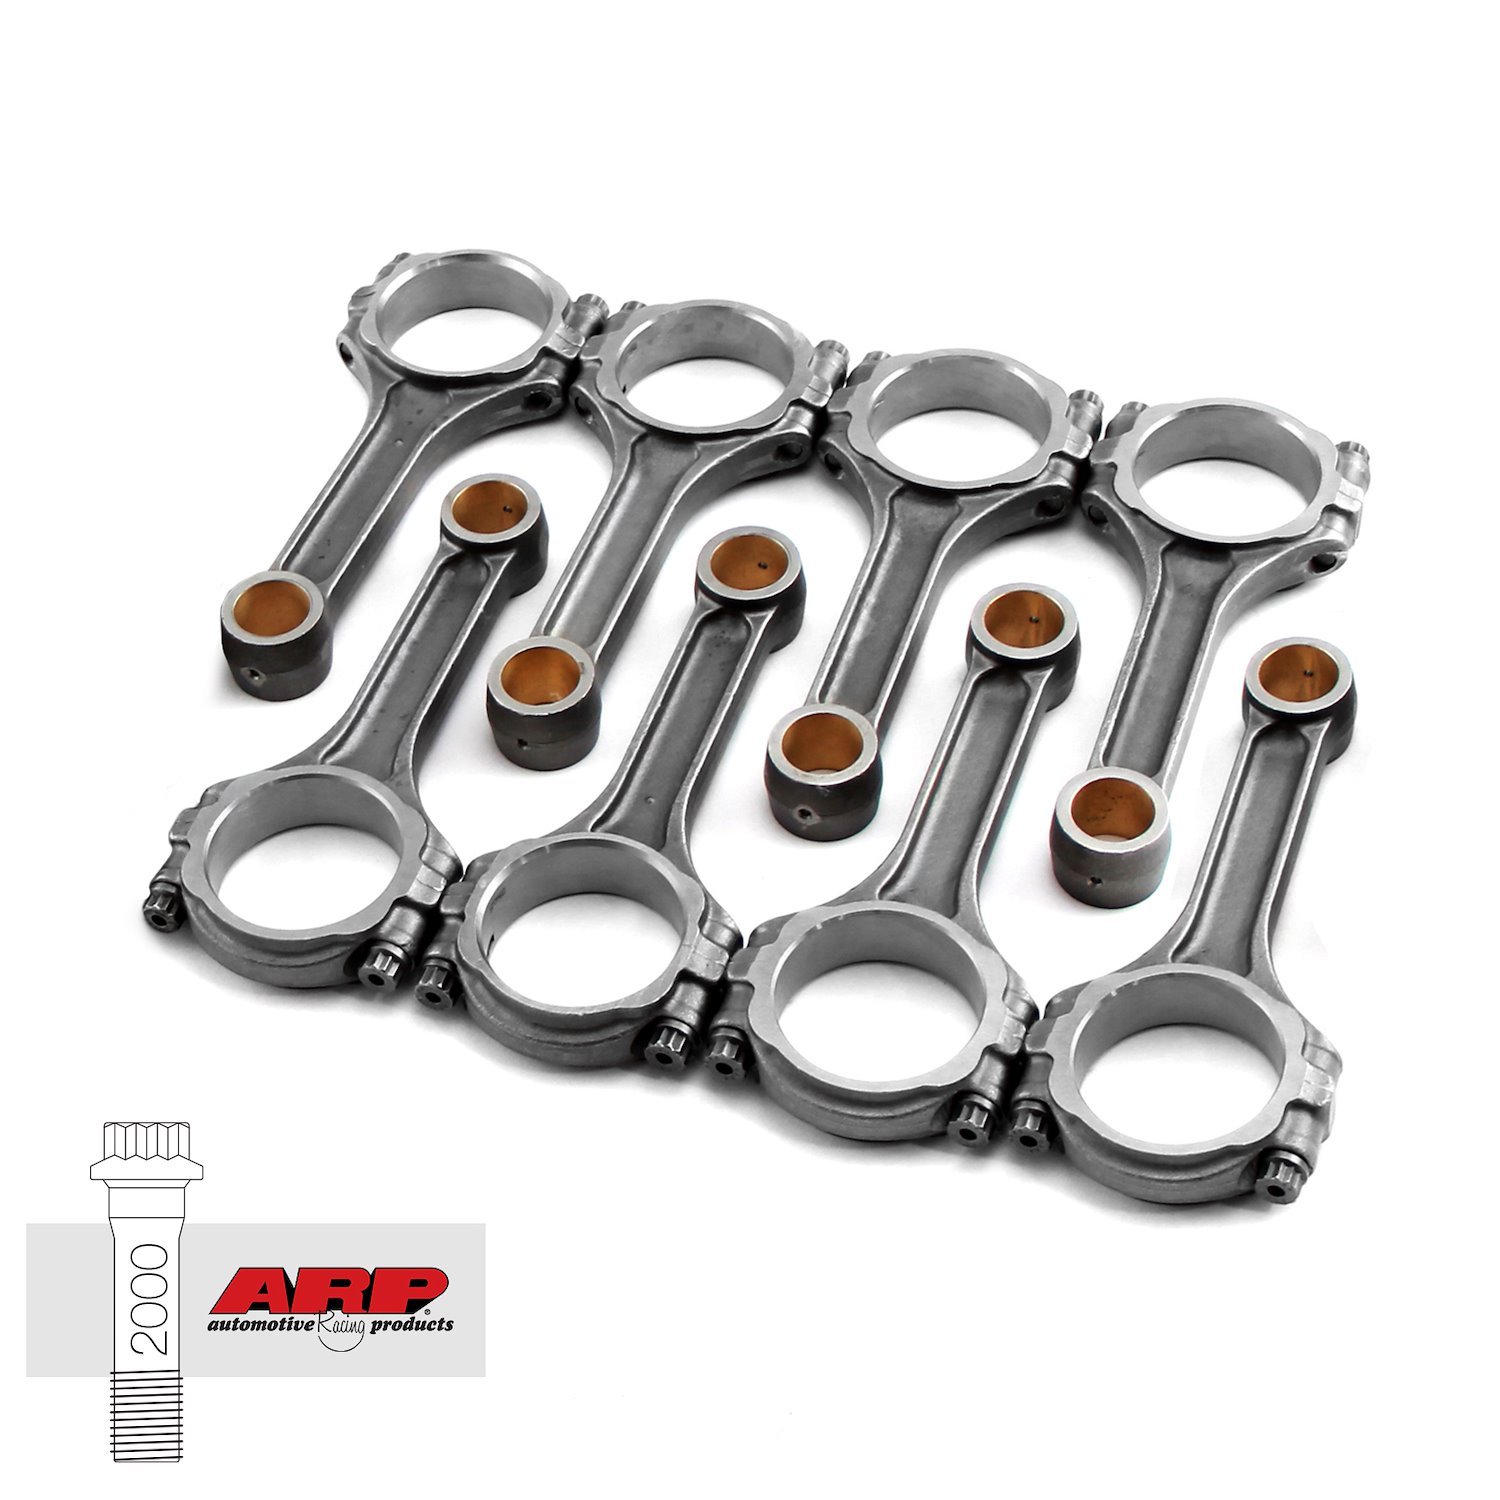 I BEAM 5.700 2.100 .927 5140 CONNECTING RODS